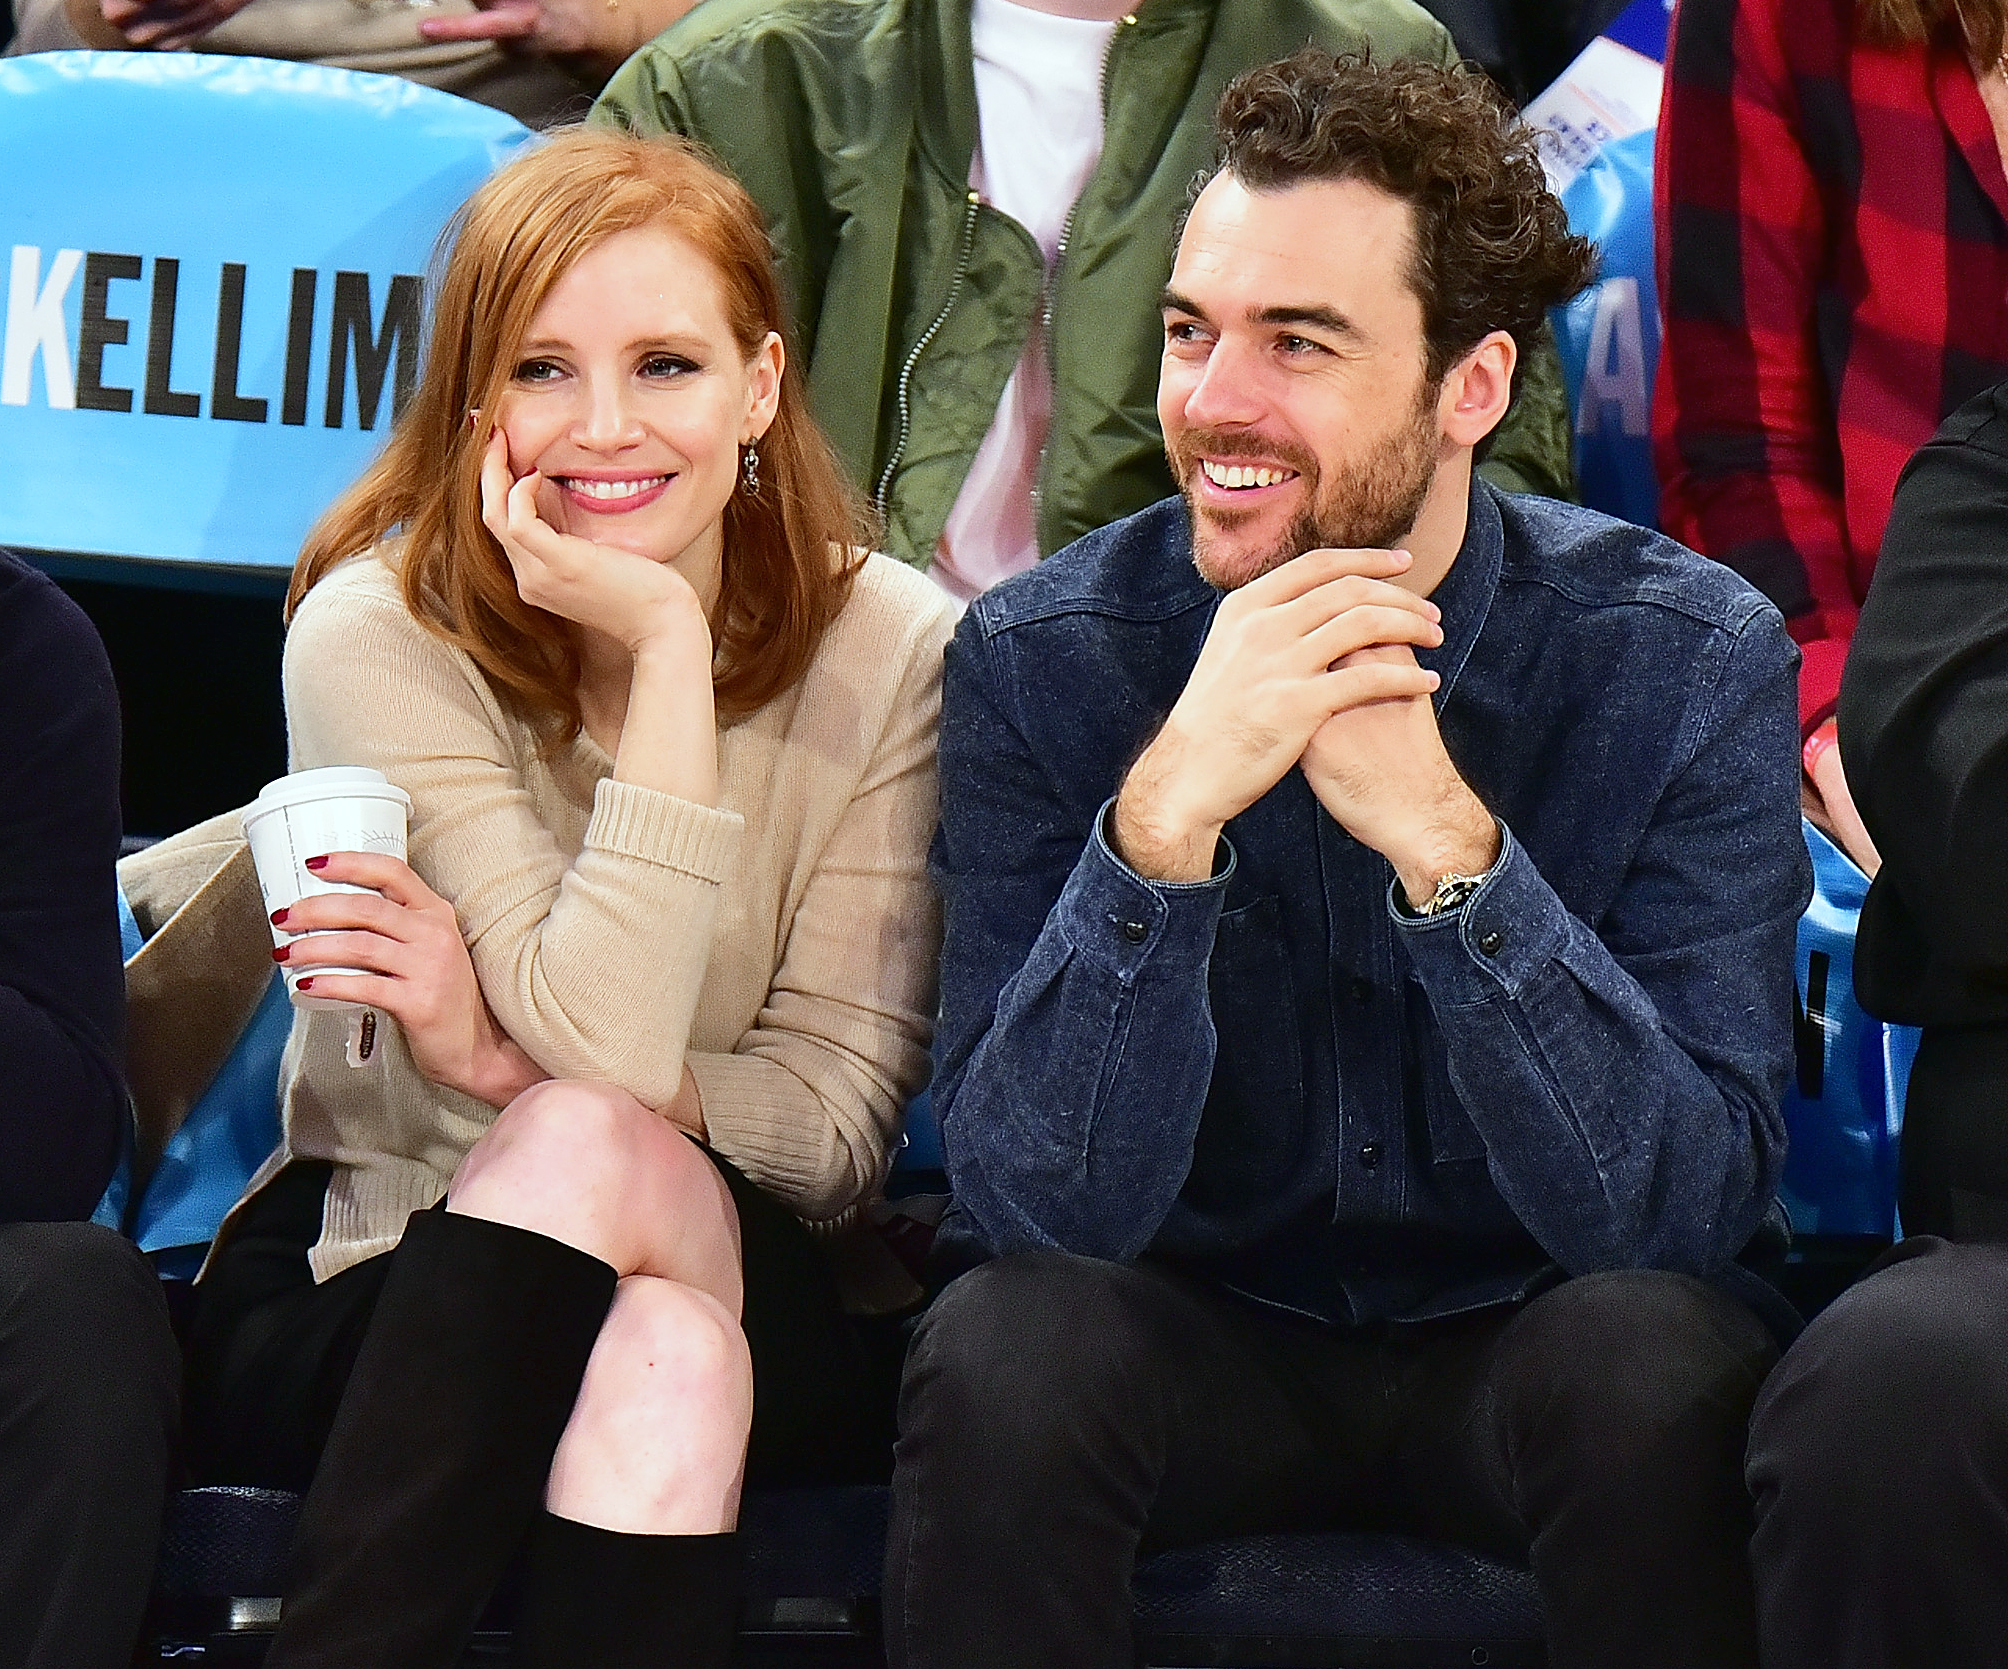 Jessica chastain's new husband gian luca passi de preposulo is serious...